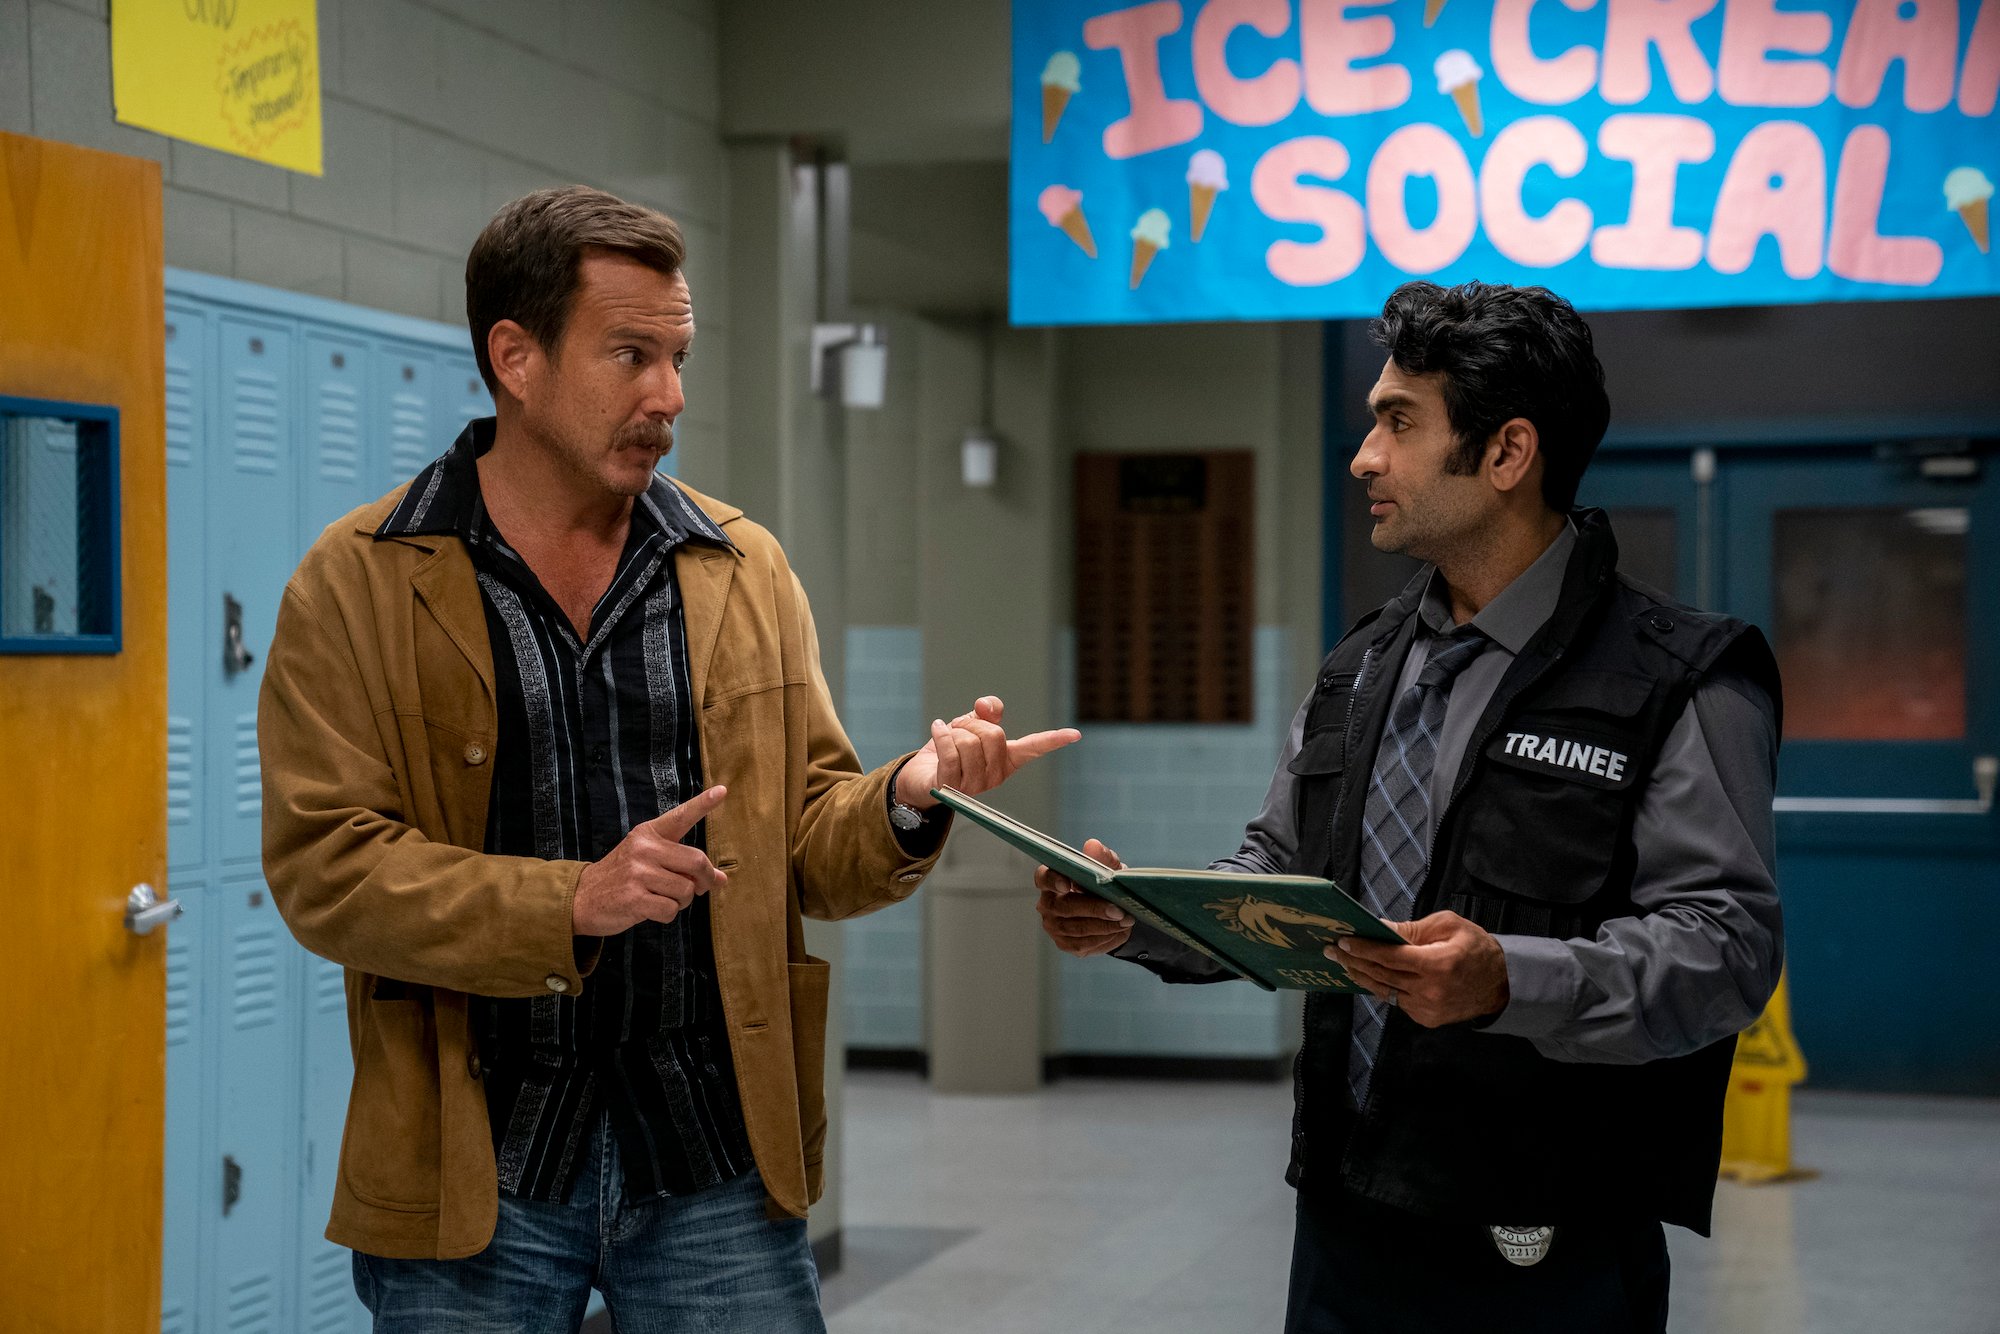 'Murderville' star Will Arnett stands next to celebrity guest Kumail Nanjiani in the halls of a high school.